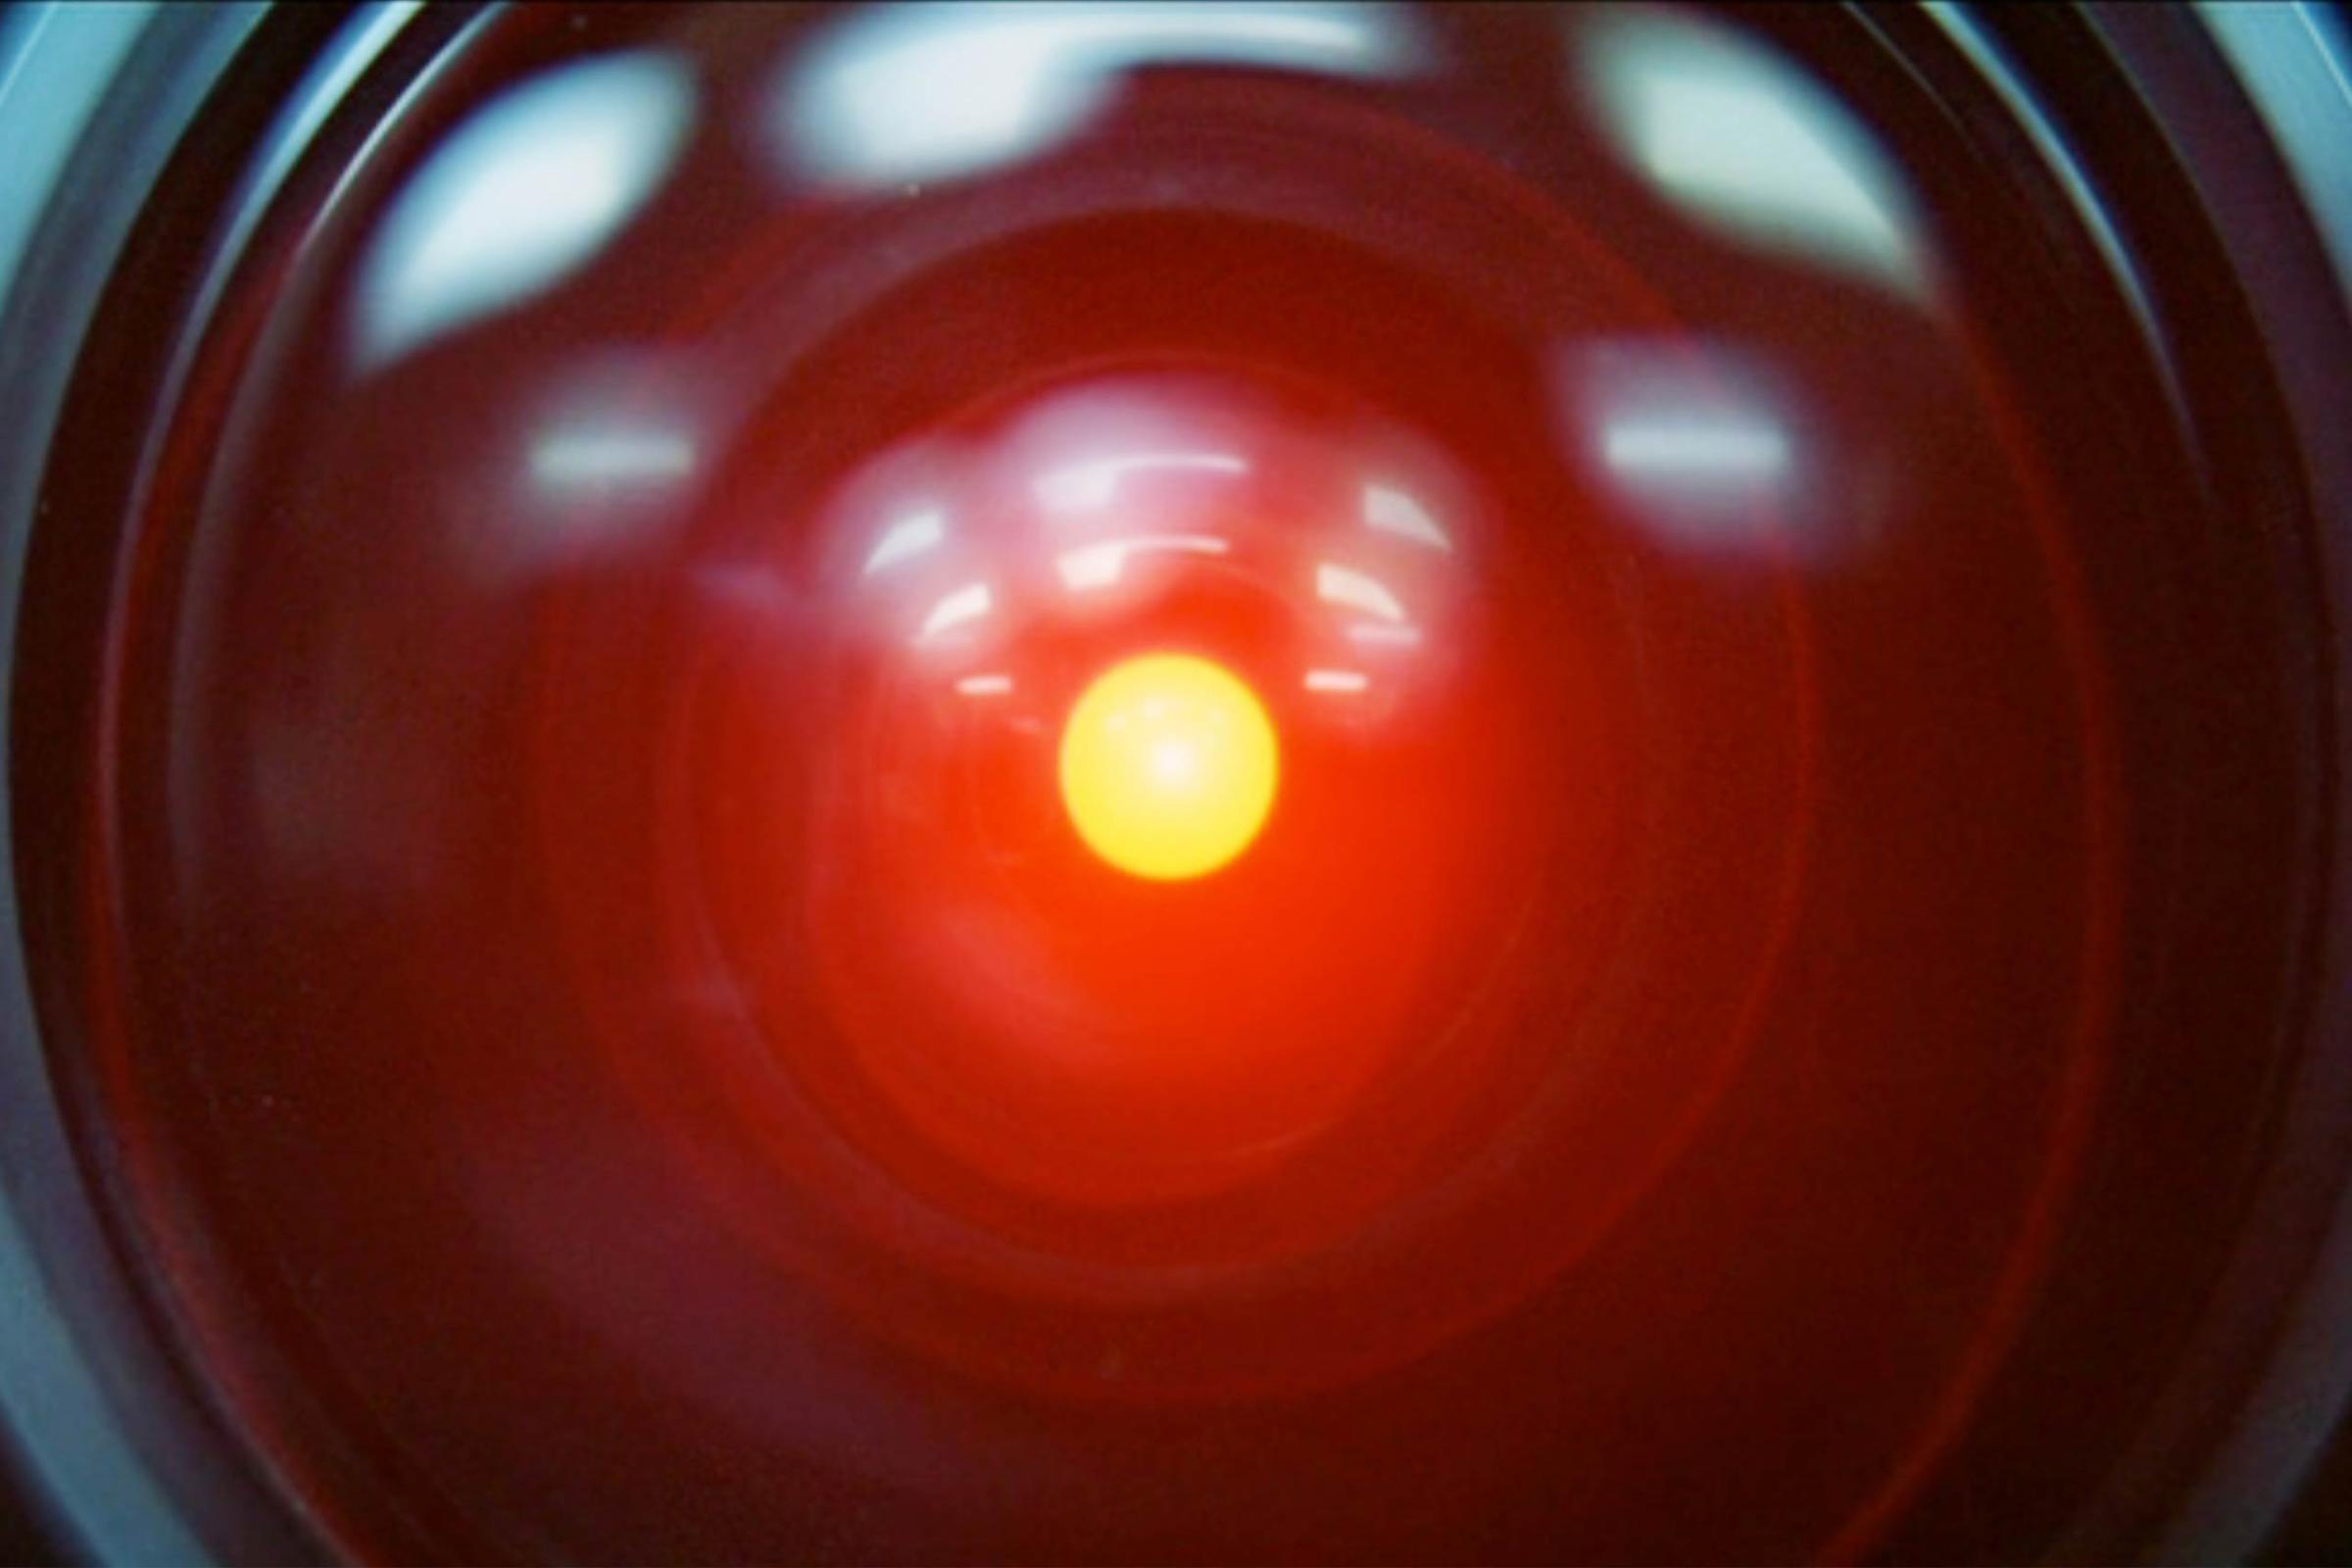 The movie "2001: A Space Odyssey", directed by Stanley Kubrick. Screenplay by Stanley Kubrick and Arthur C. Clarke. The camera eye of the HAL 9000 computer on Discovery One spaceship. Initial theatrical release April 6, 1968. Screen capture. © 1968 Metro-Goldwyn-Mayer Studios. Credit: © 1968 MGM / Flickr / Courtesy Pikturz.Image intended only for use to help promote the film, in an editorial, non-commercial context.